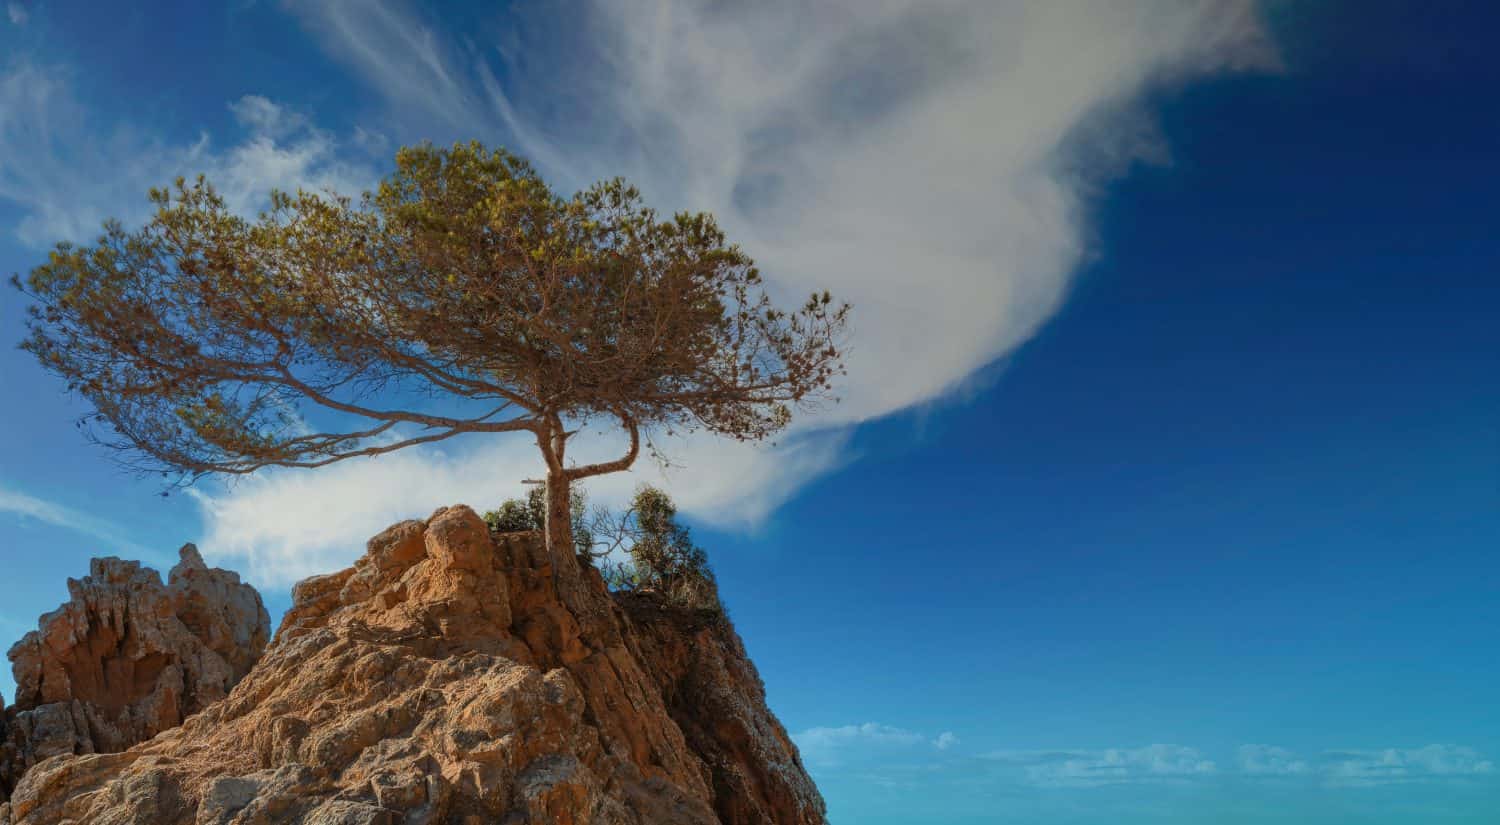 Cedar tree on a rock against the background of fluffy clouds on a blue sky